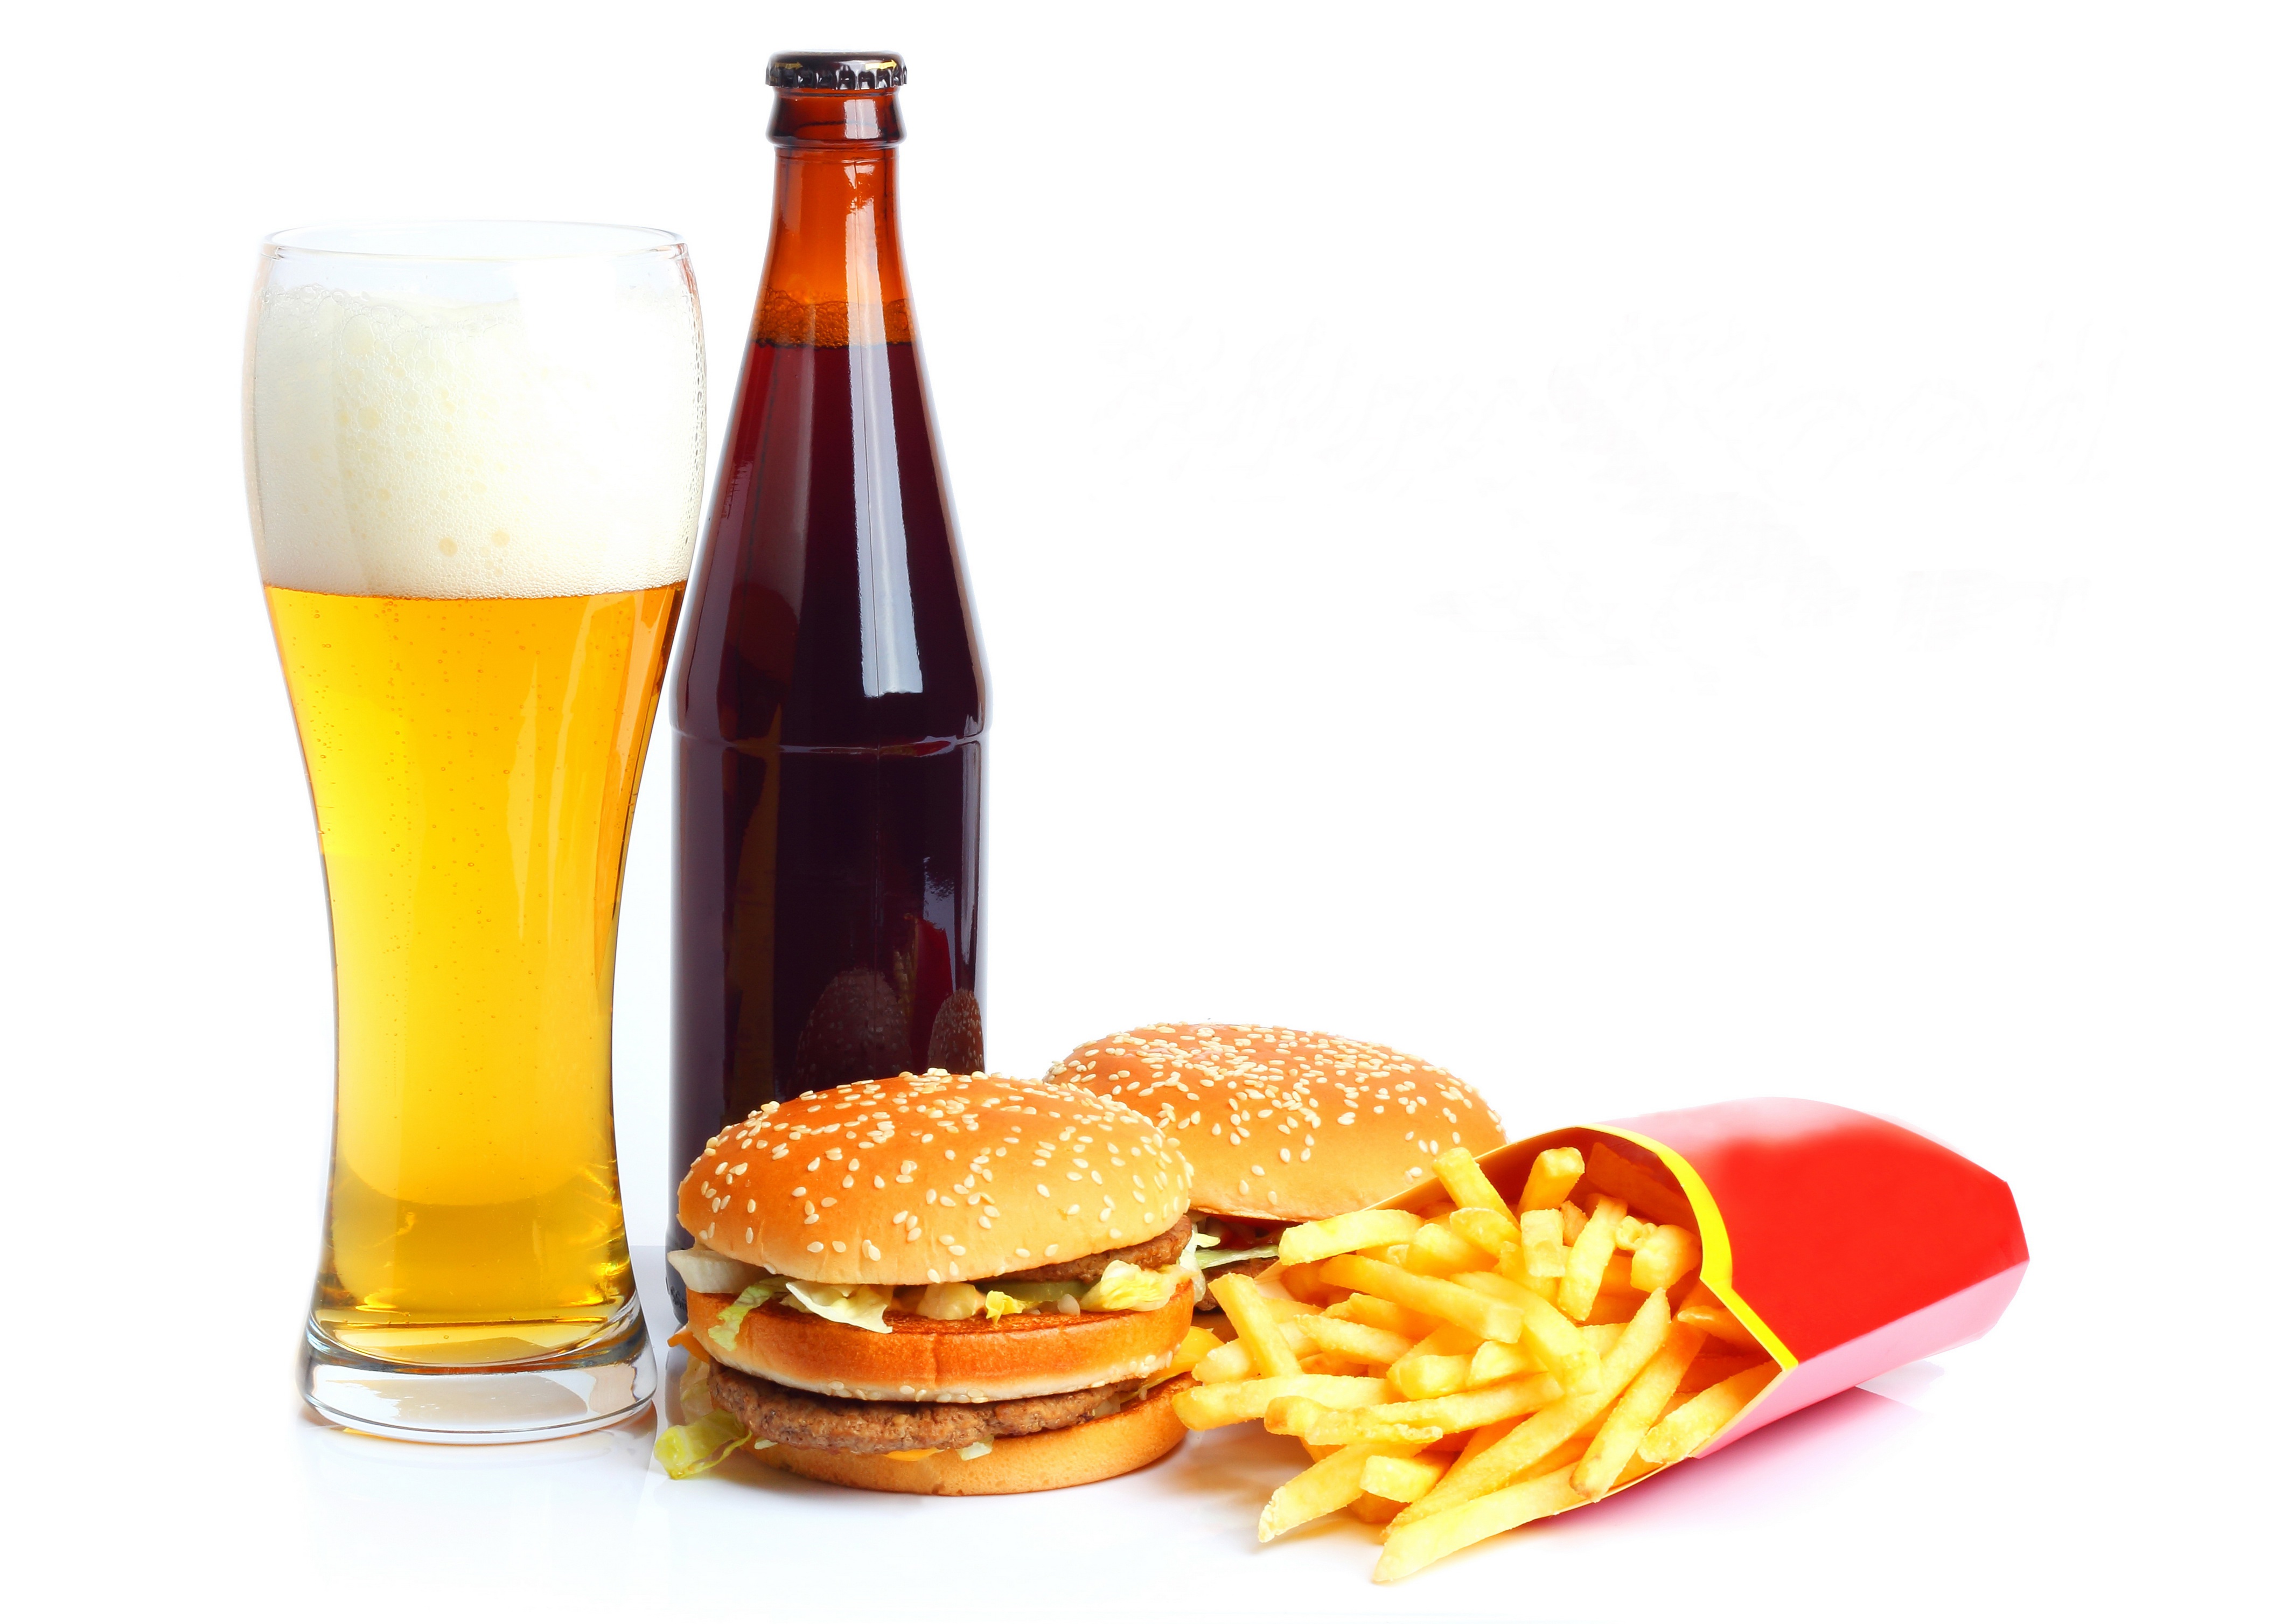 Beer Bottle Burger Drink French Fries 4250x3015